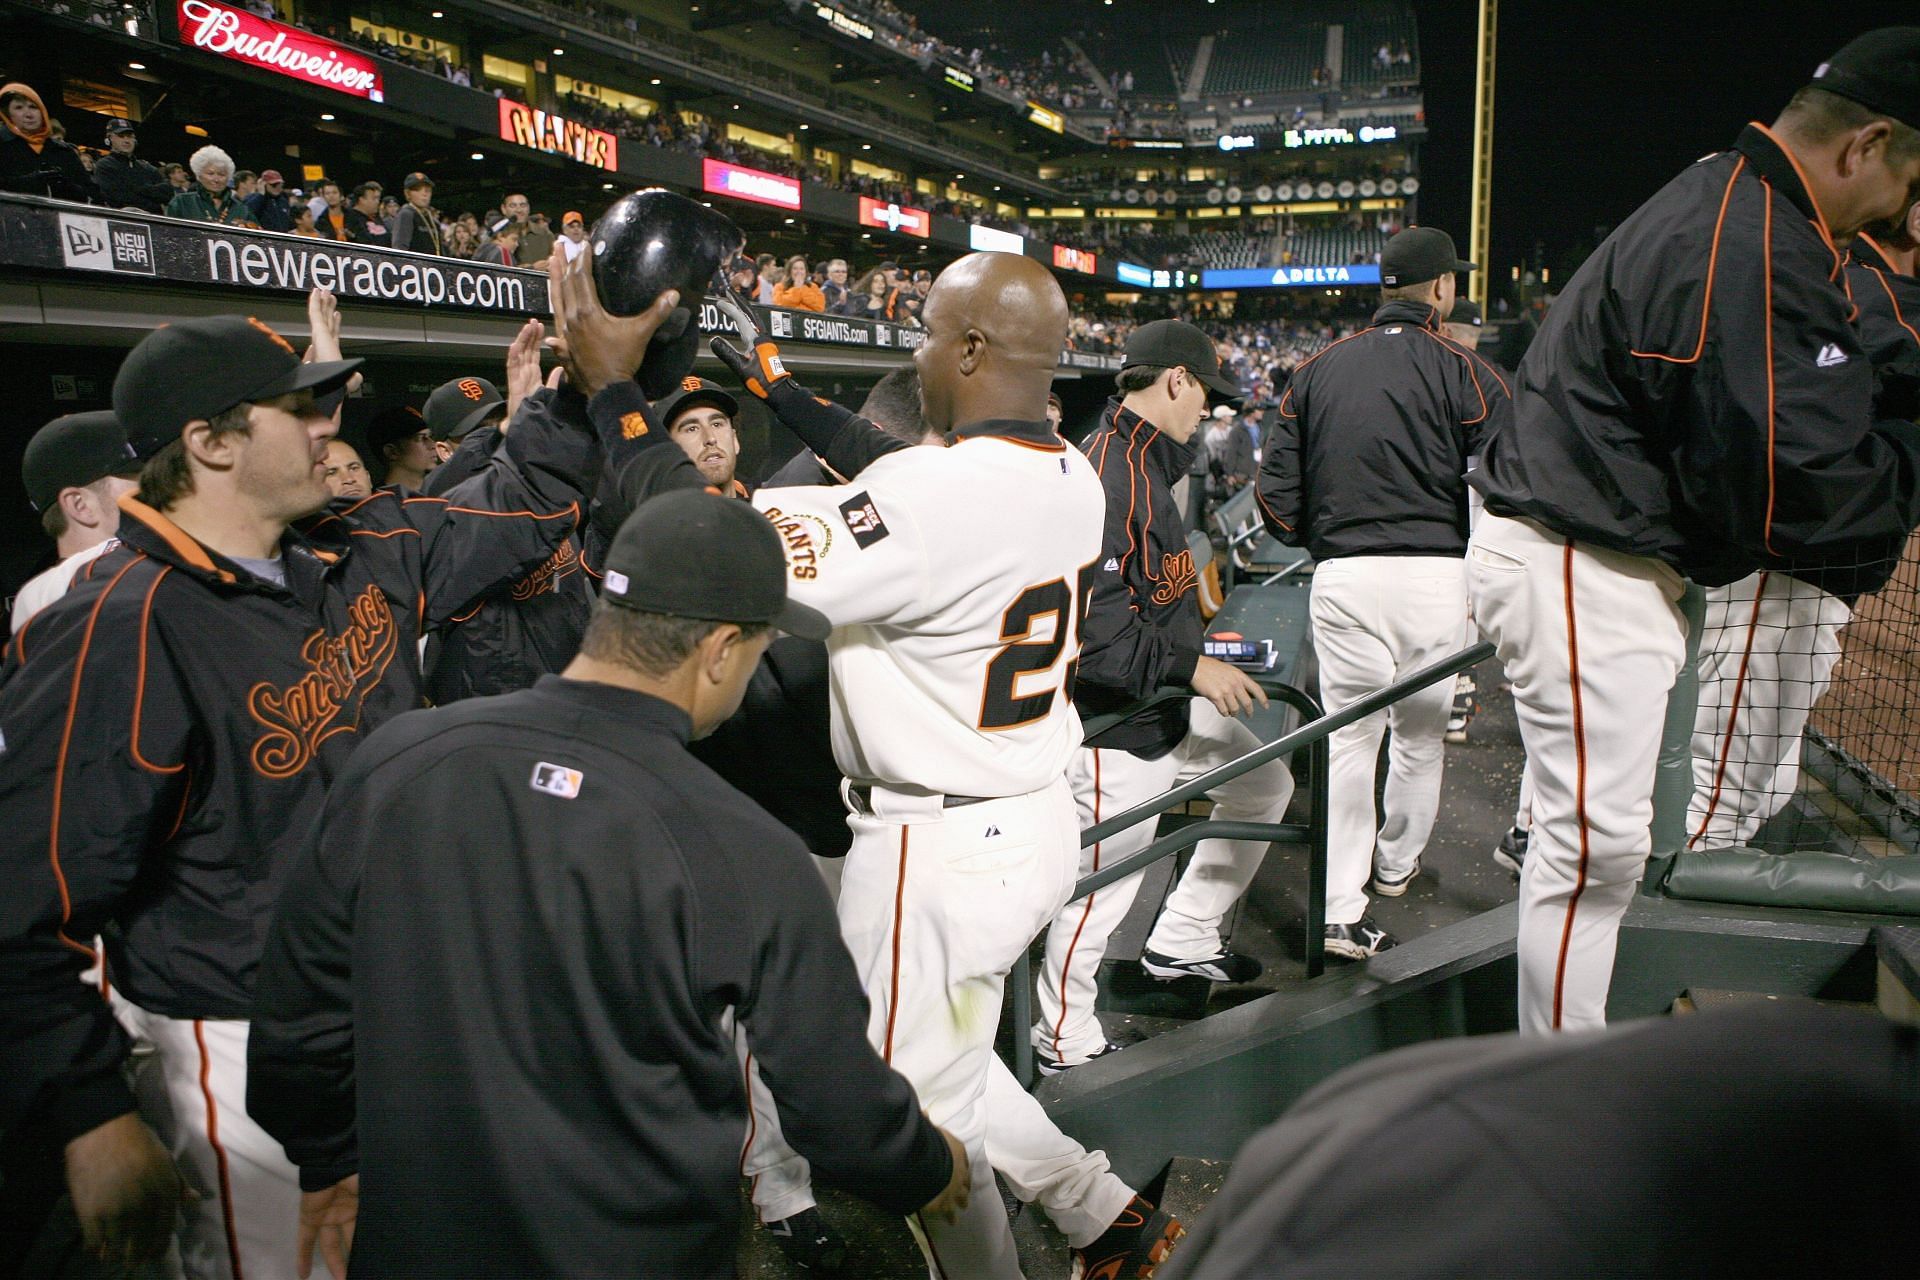 Barry Bonds of the San Francisco Giants is congratulated by teammates in the dugout.